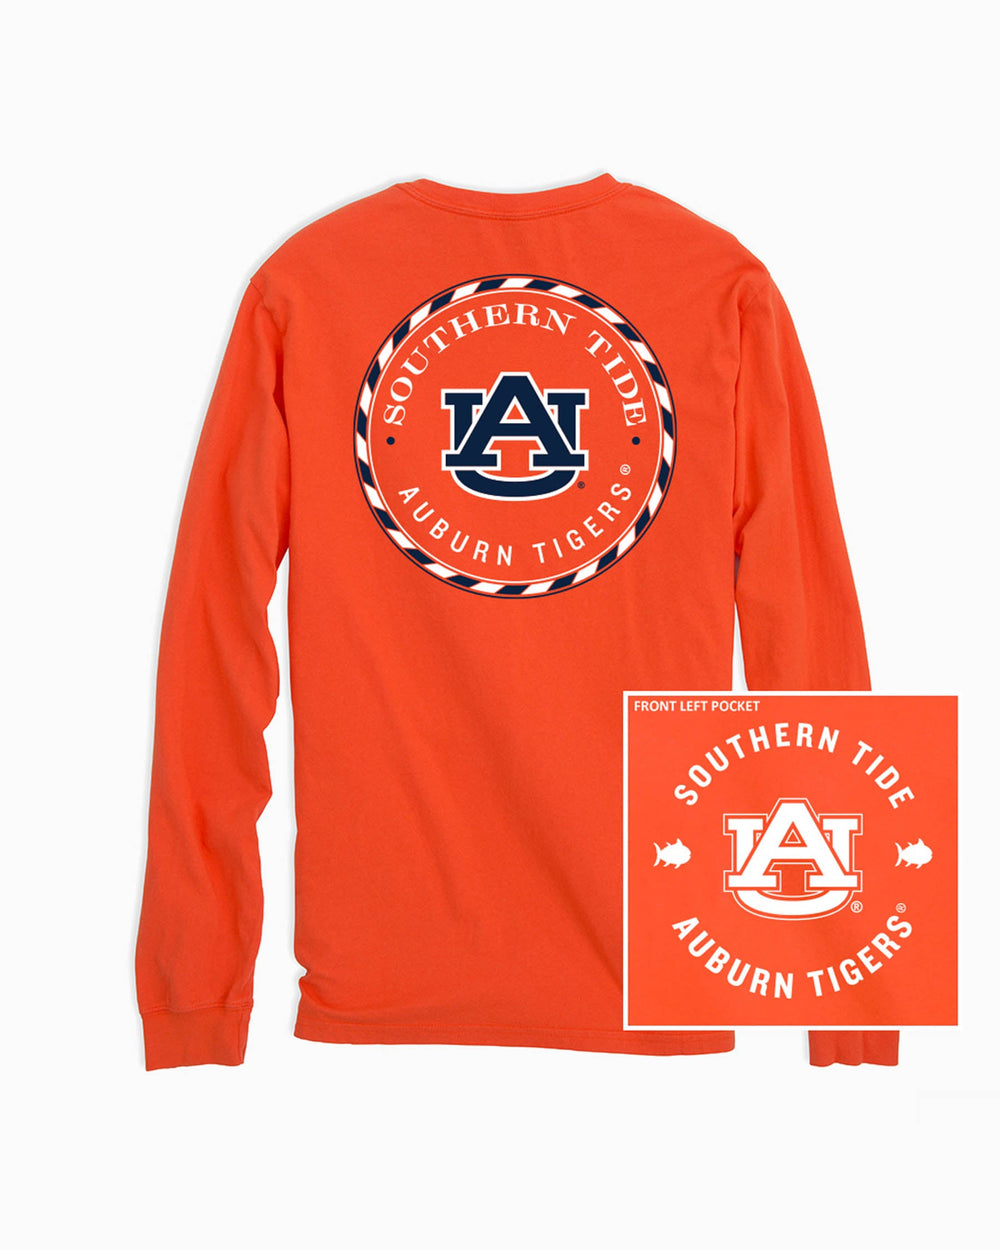 The front and back of the Auburn Tigers Long Sleeve Medallion Logo T-Shirt by Southern Tide - Endzone Orange